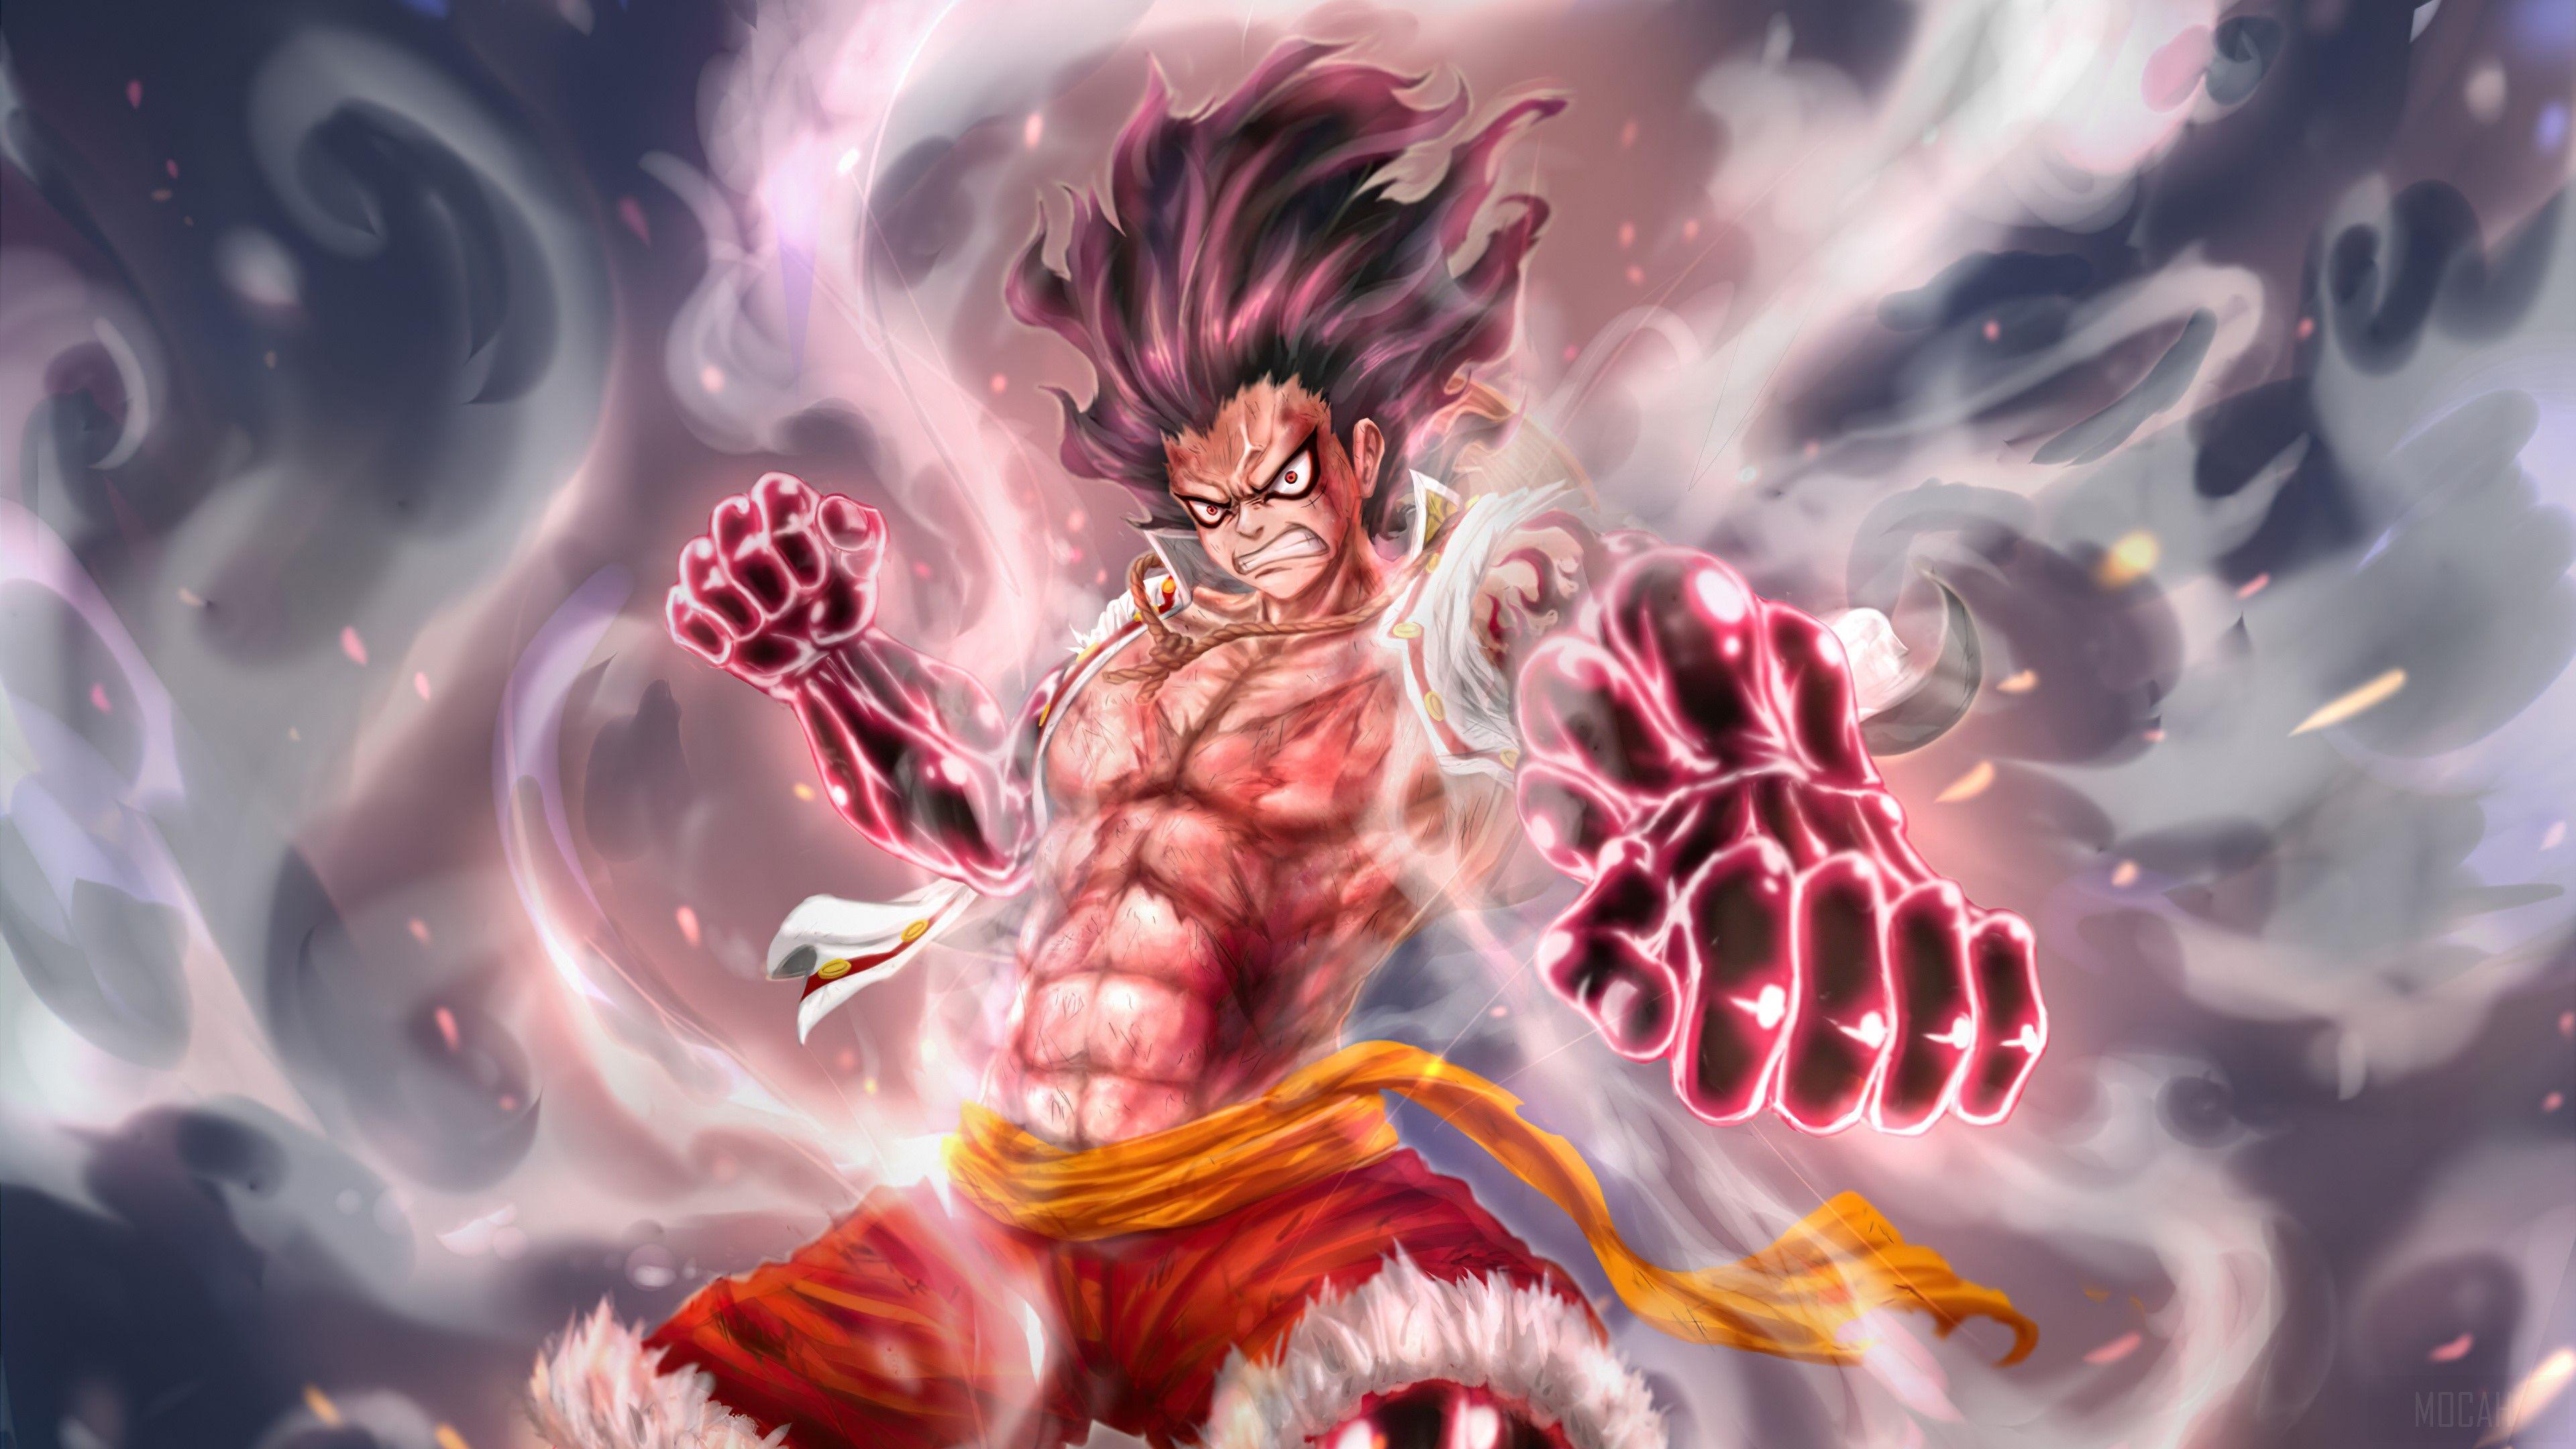 One Piece Luffy Gear 4 Wallpapers Top Free One Piece Luffy Gear 4 Backgrounds Wallpaperaccess